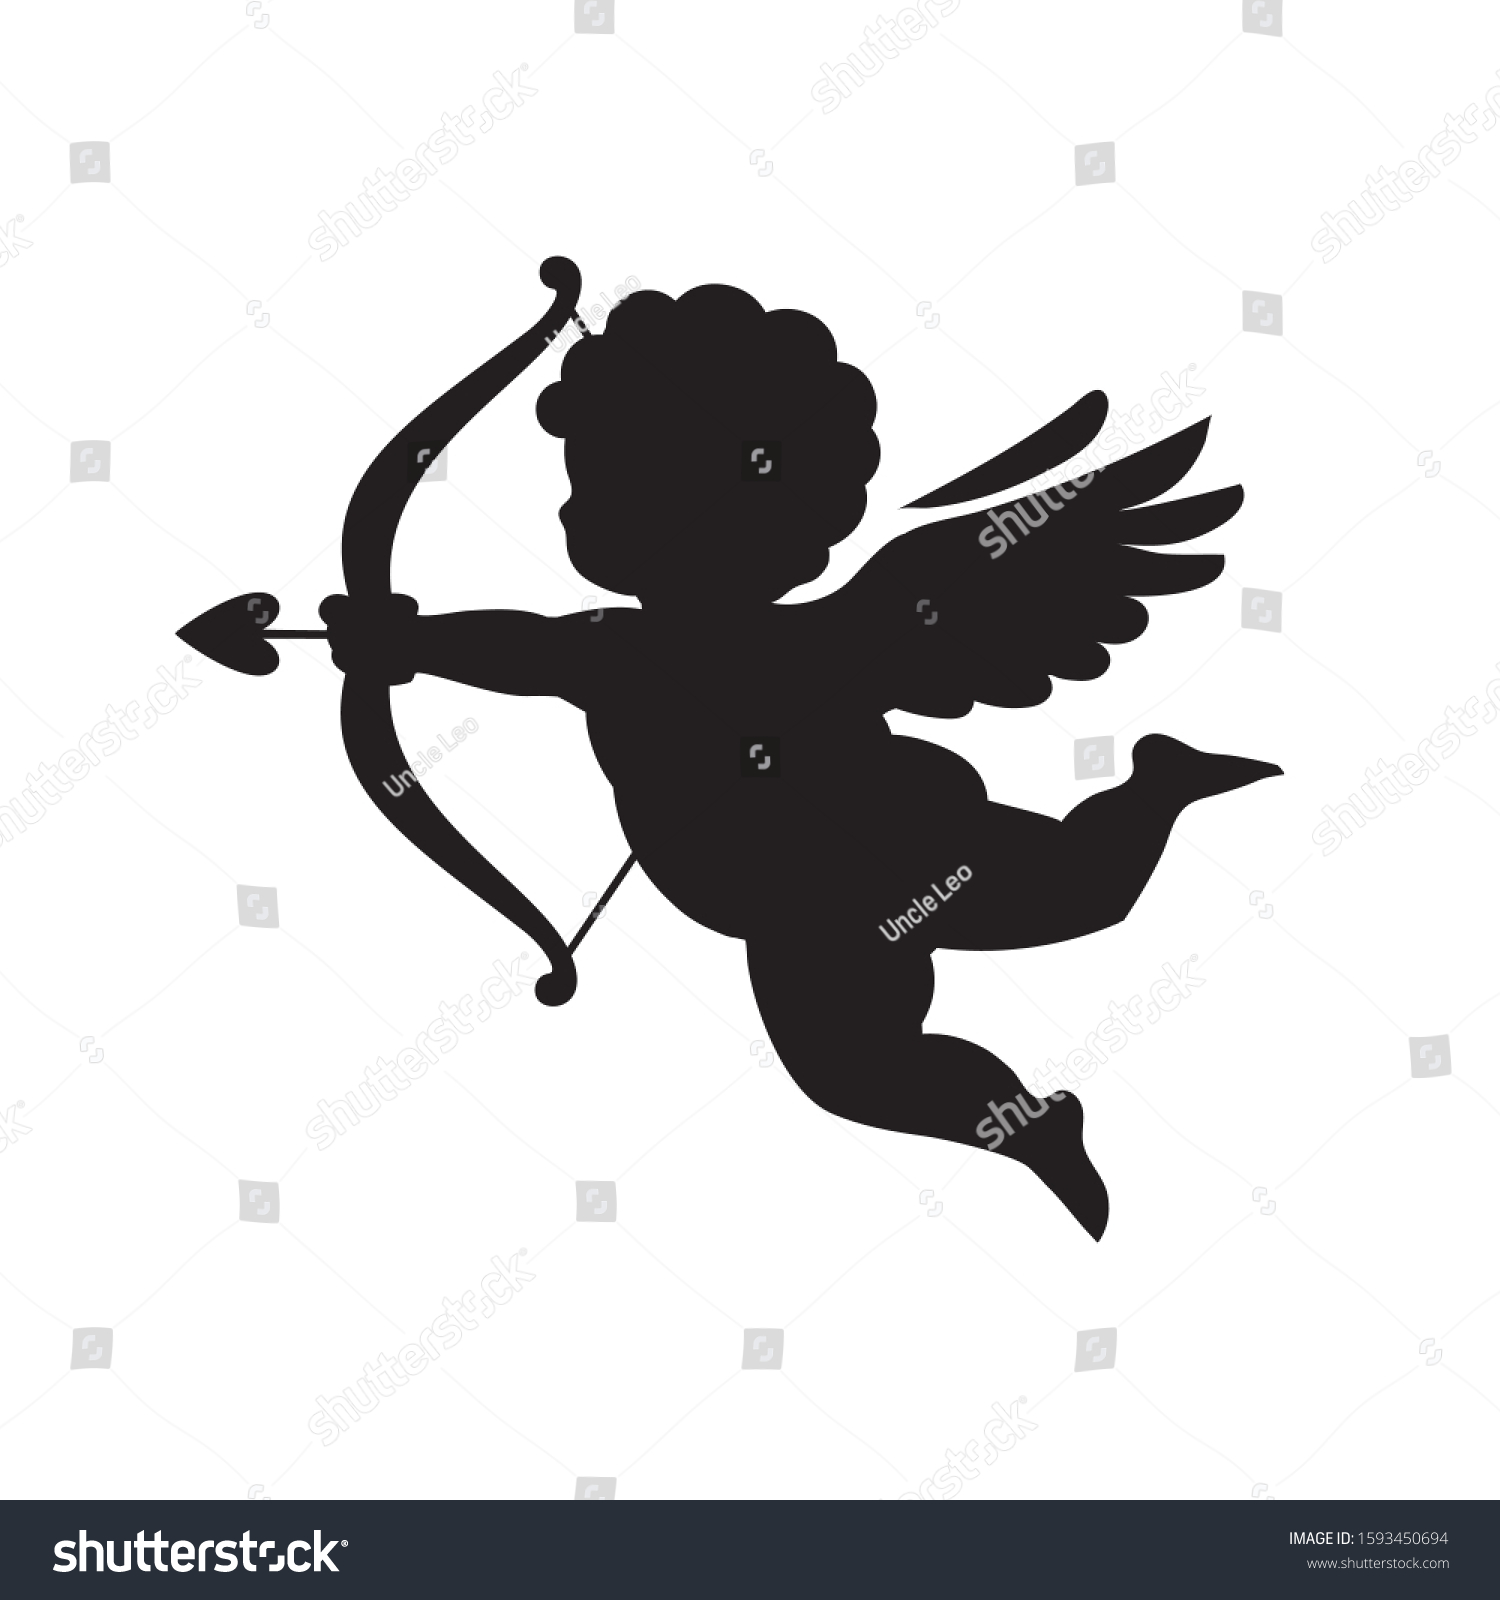 SVG of Black silhouette of Cupid aiming a bow and arrow. Valentine's Day love symbol.Vector illustration isolated on white background. svg